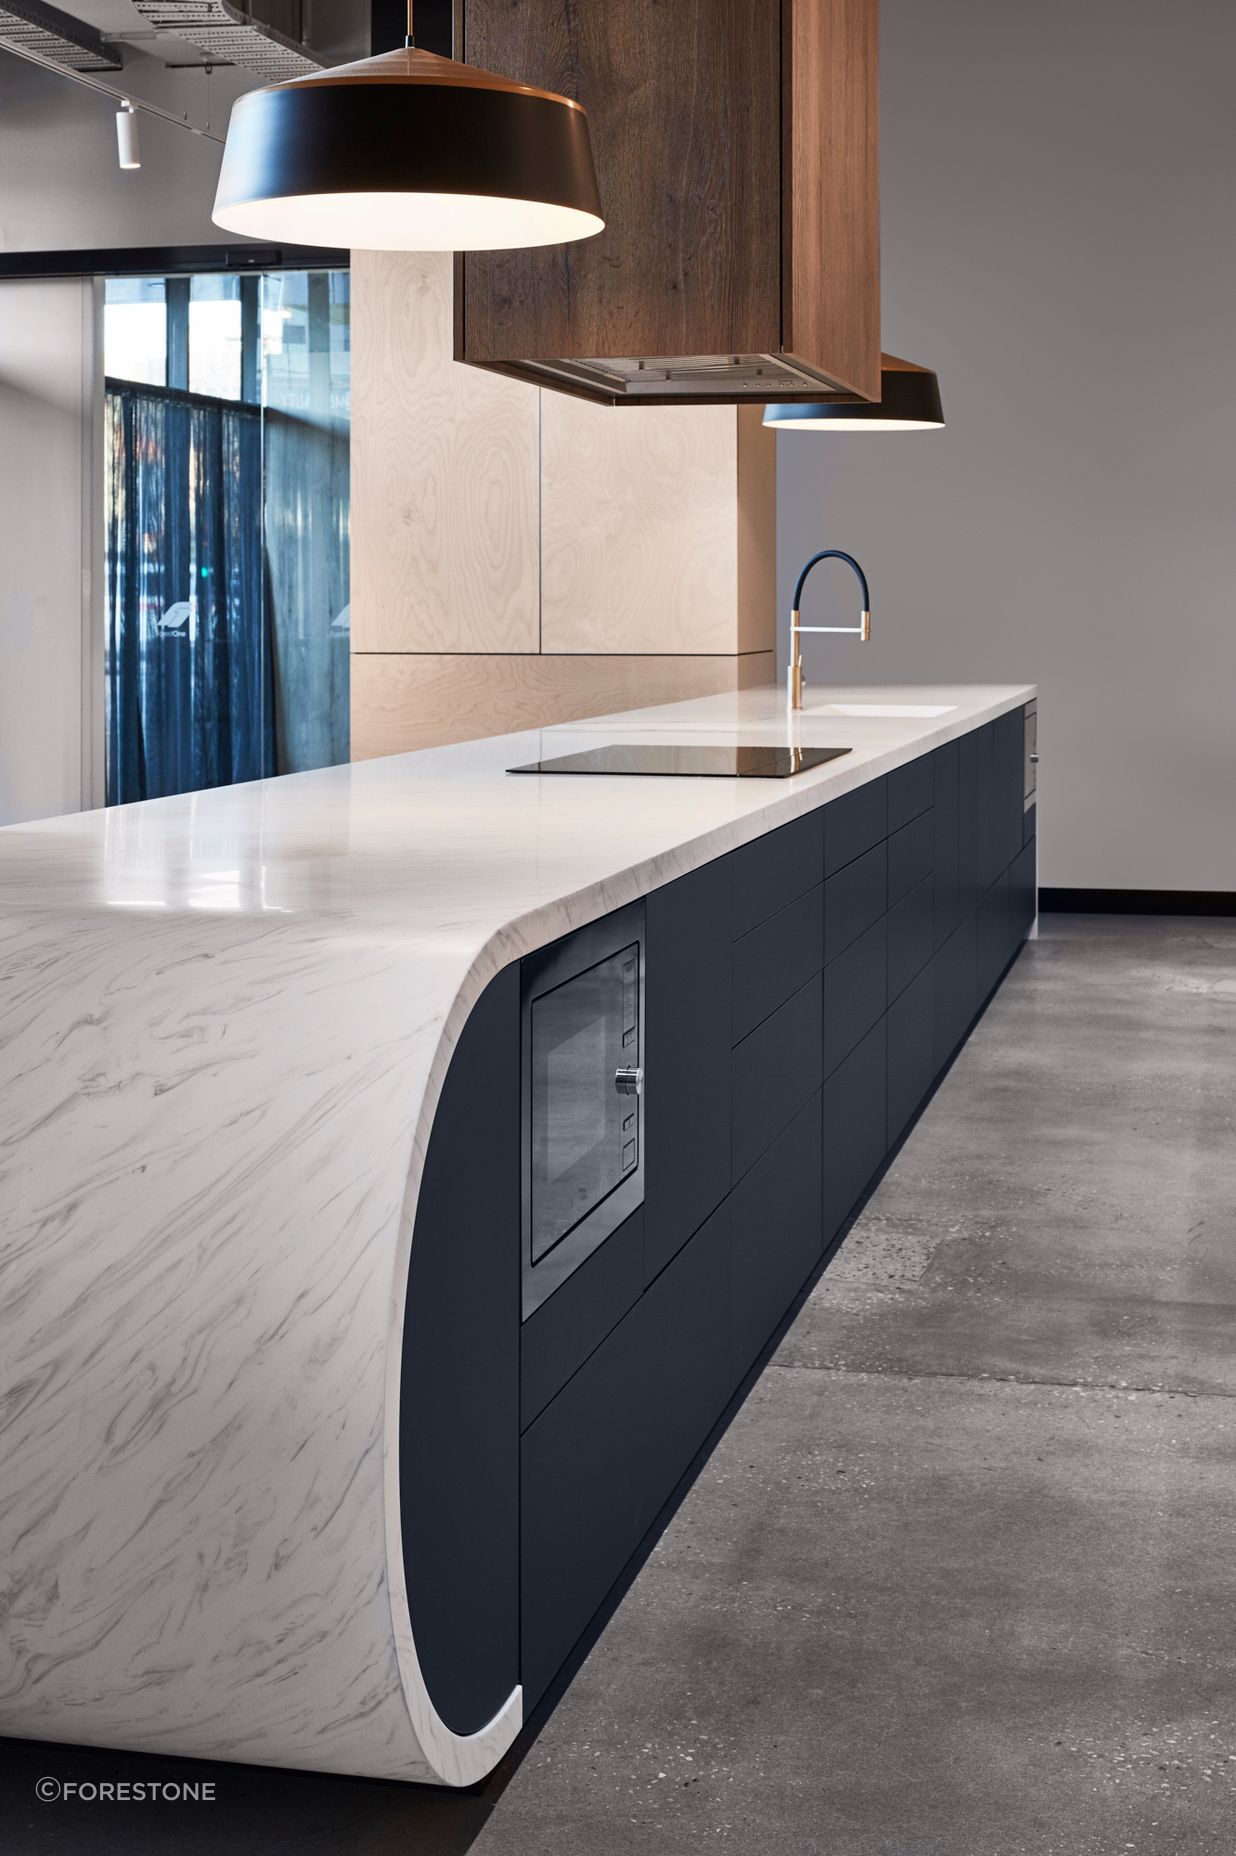 Meganite, a premium acrylic benchtop from ForestOne